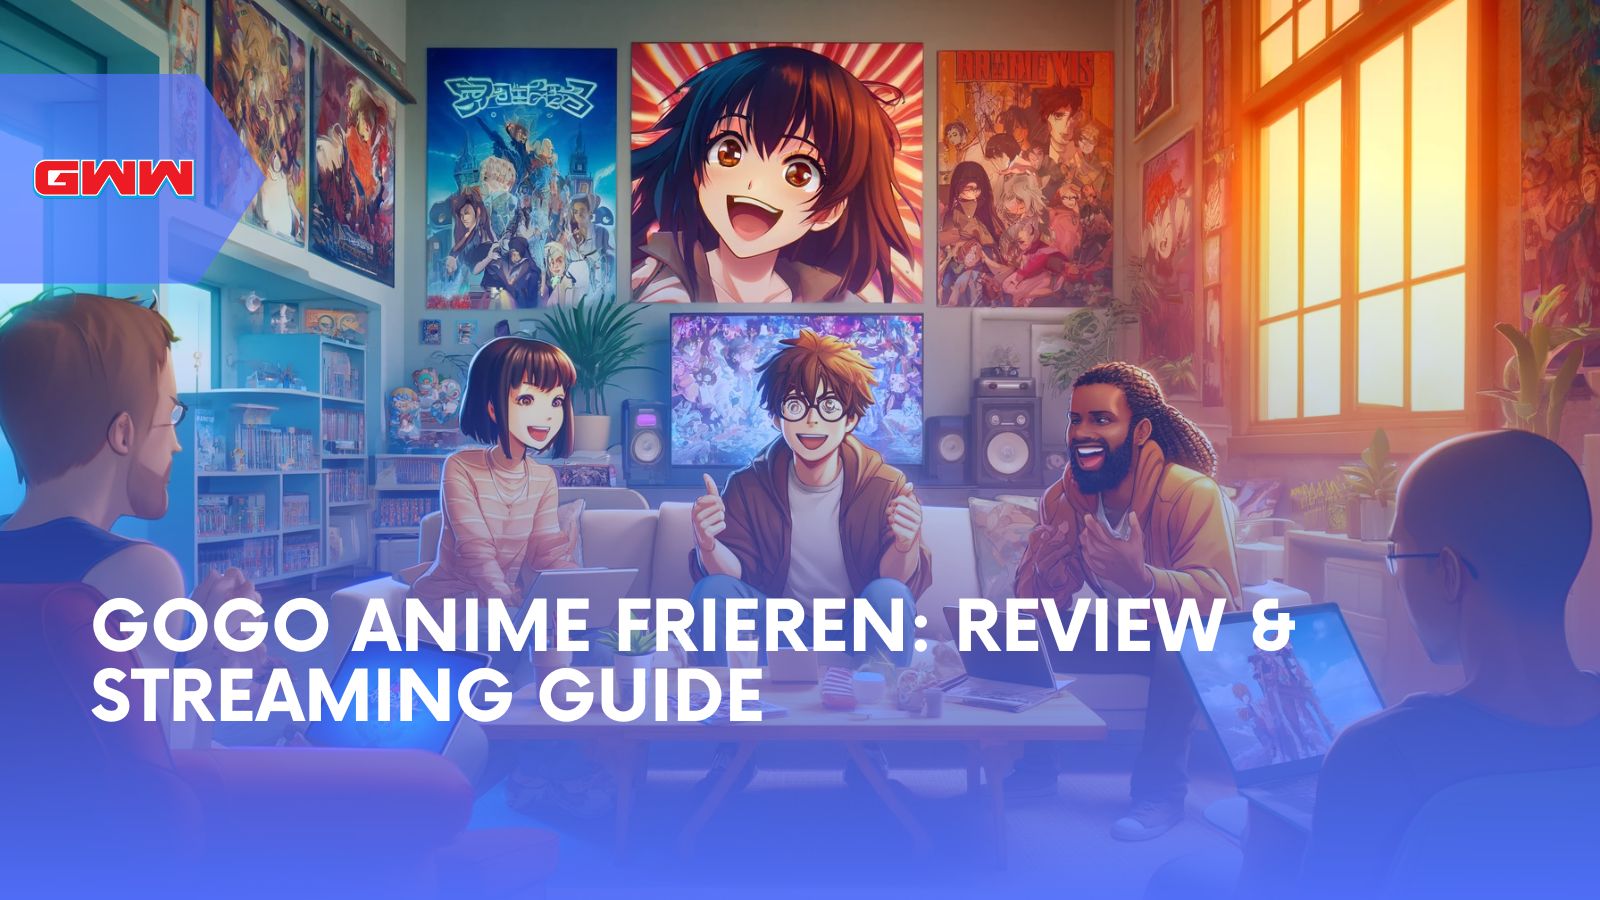 Gogo Anime Frieren: Review & Streaming Guide